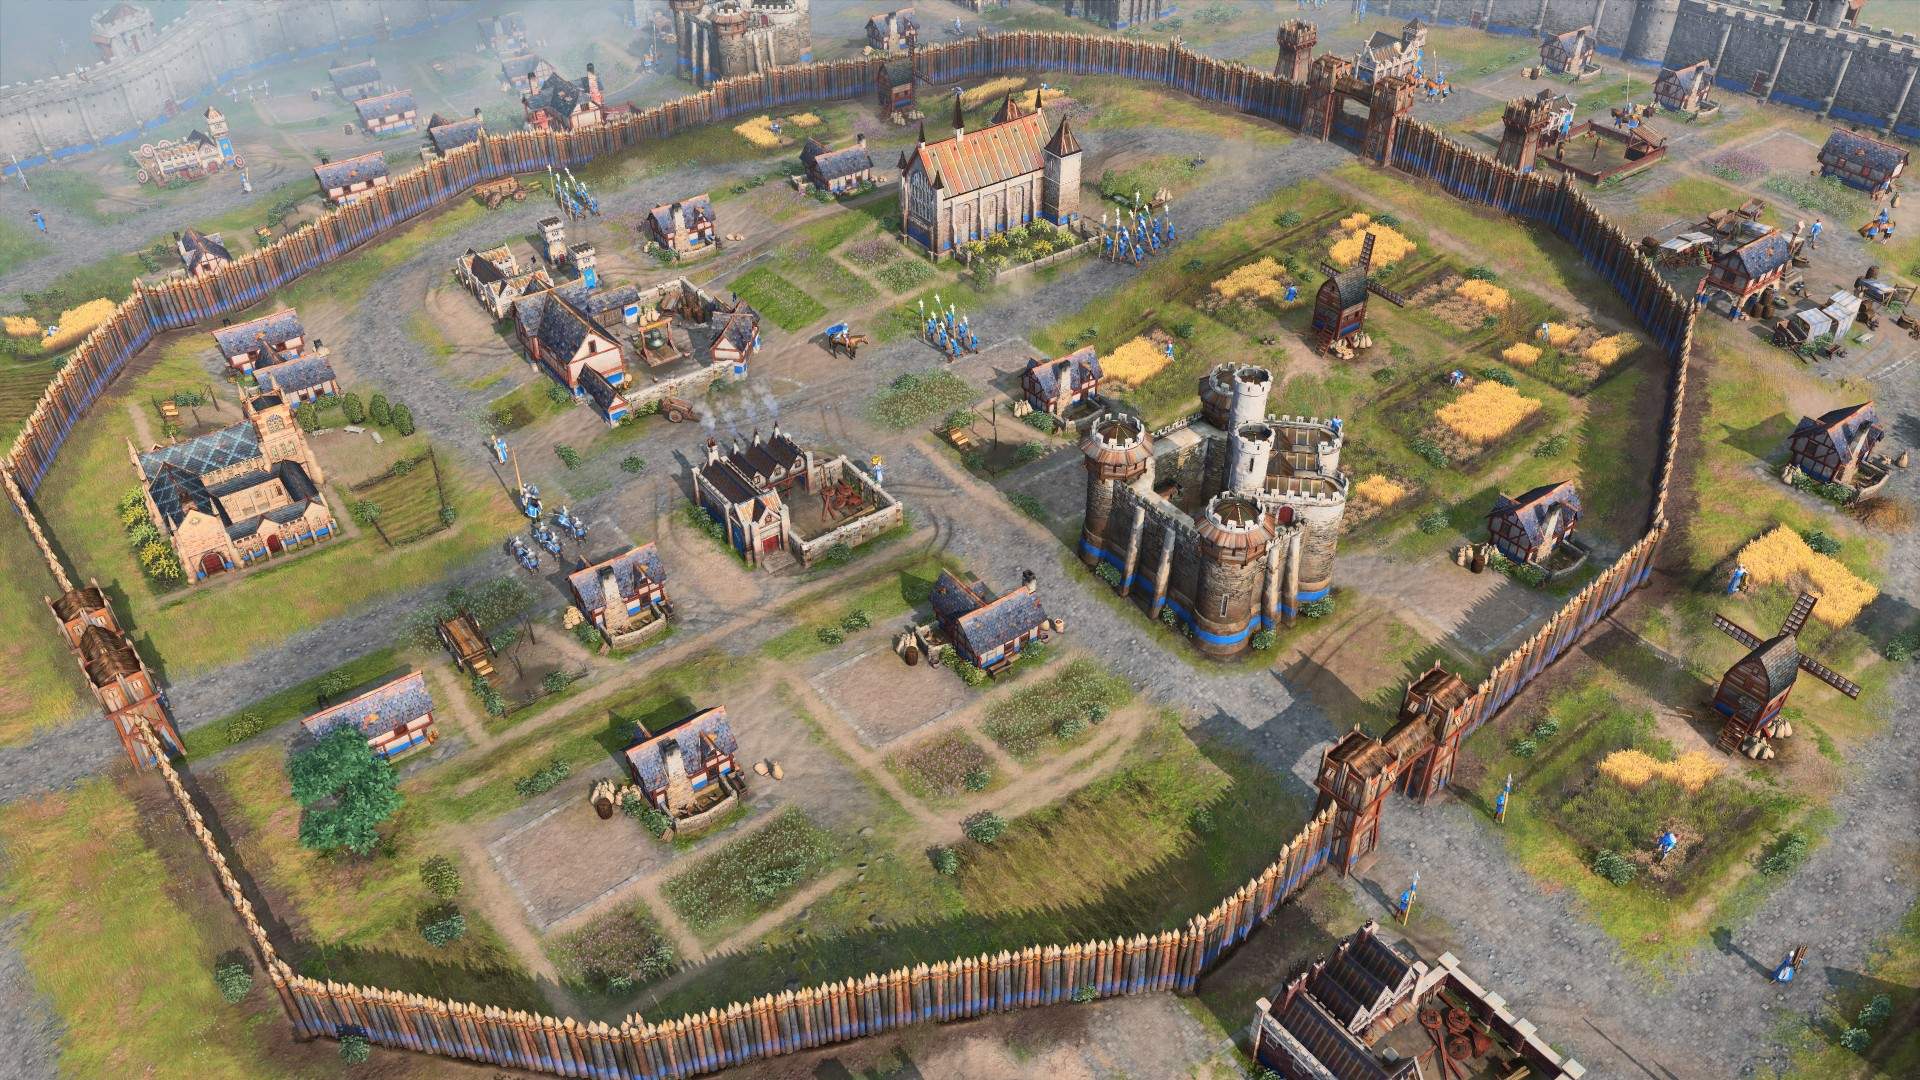 Castles, Kings, and Community: An Interview with the Team Behind Age of Empires IV